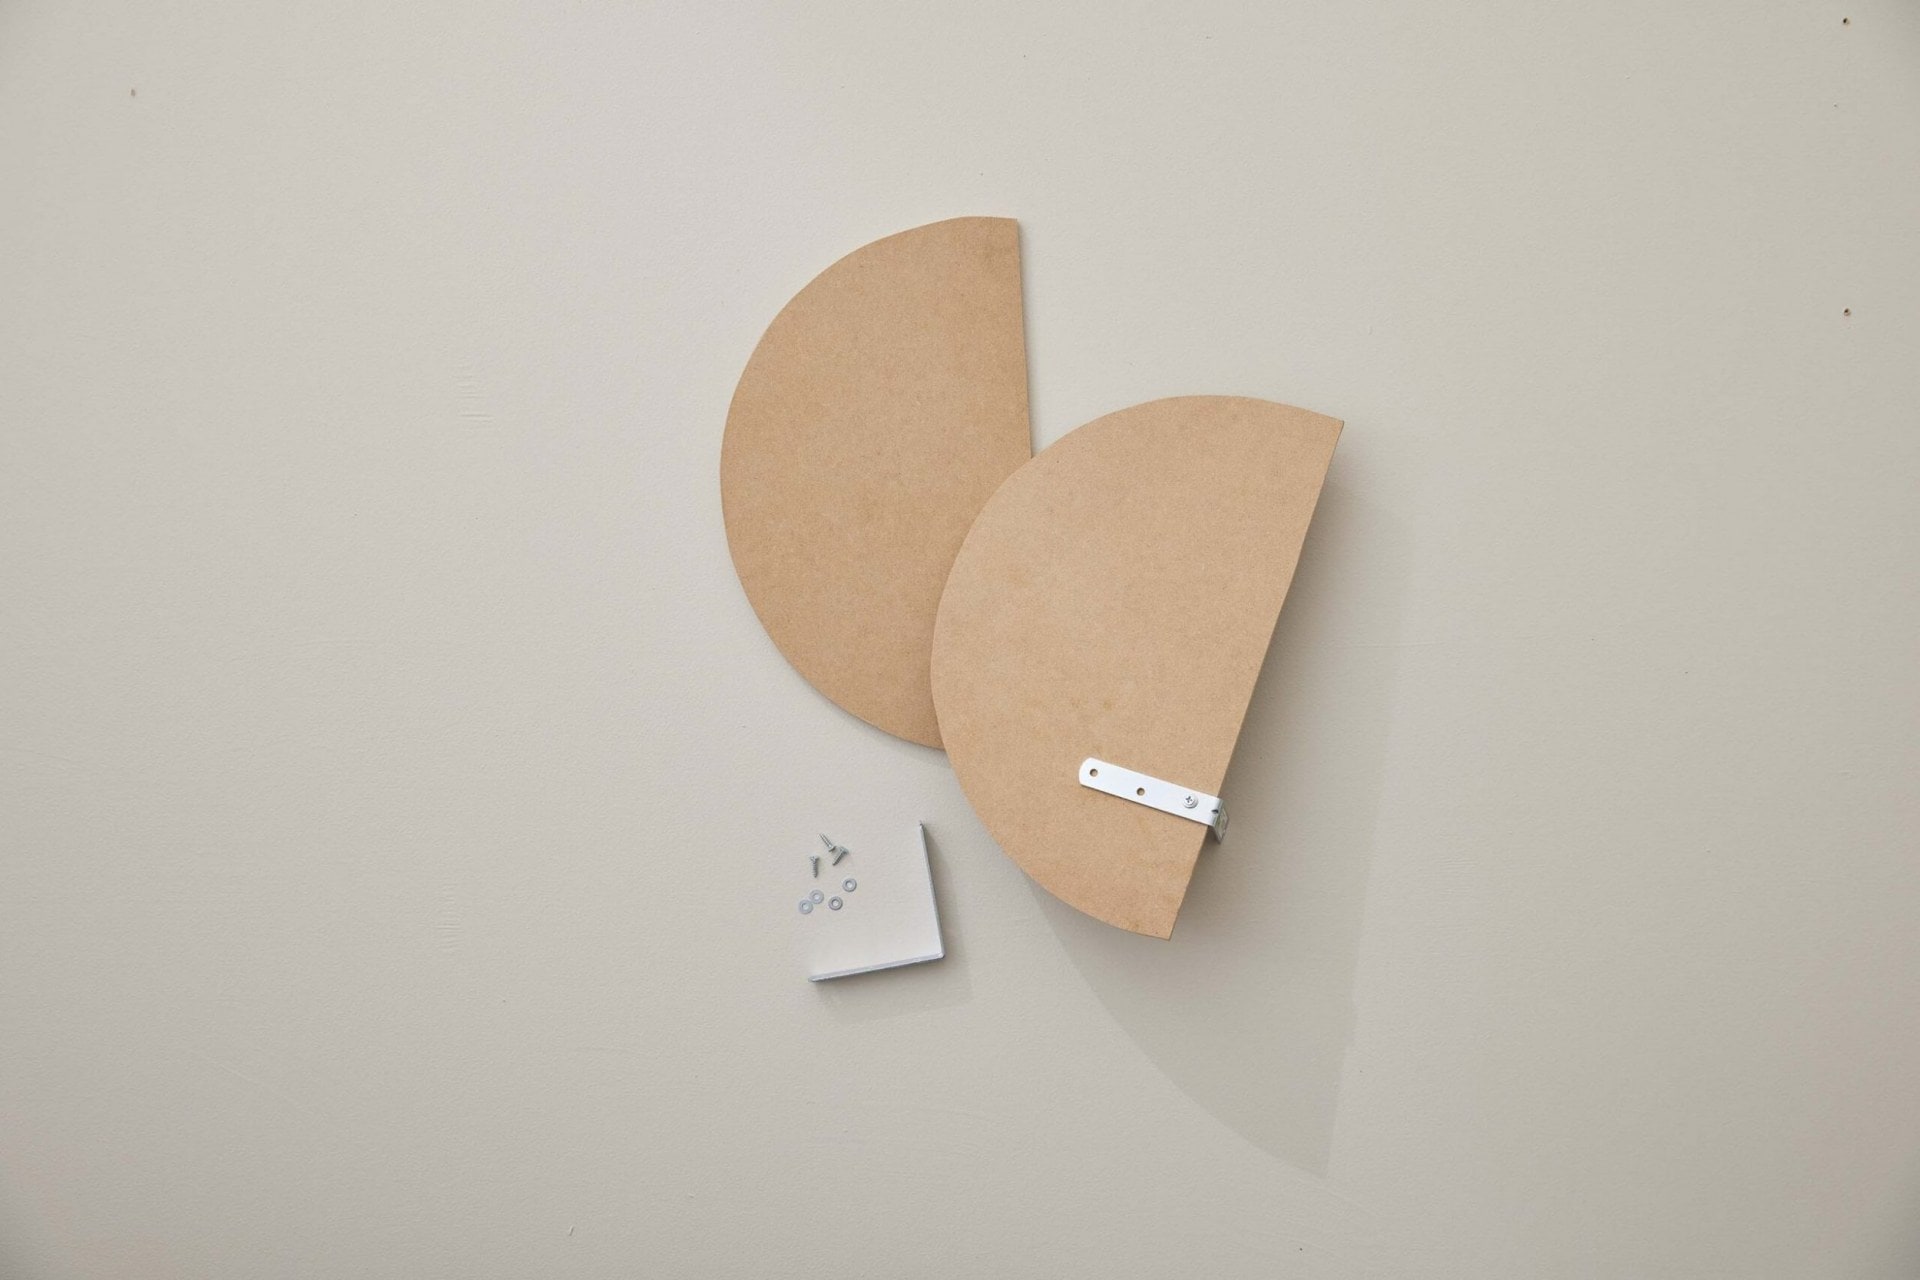 Two oval shapes cut out of an MDF board with brackets attached at the back